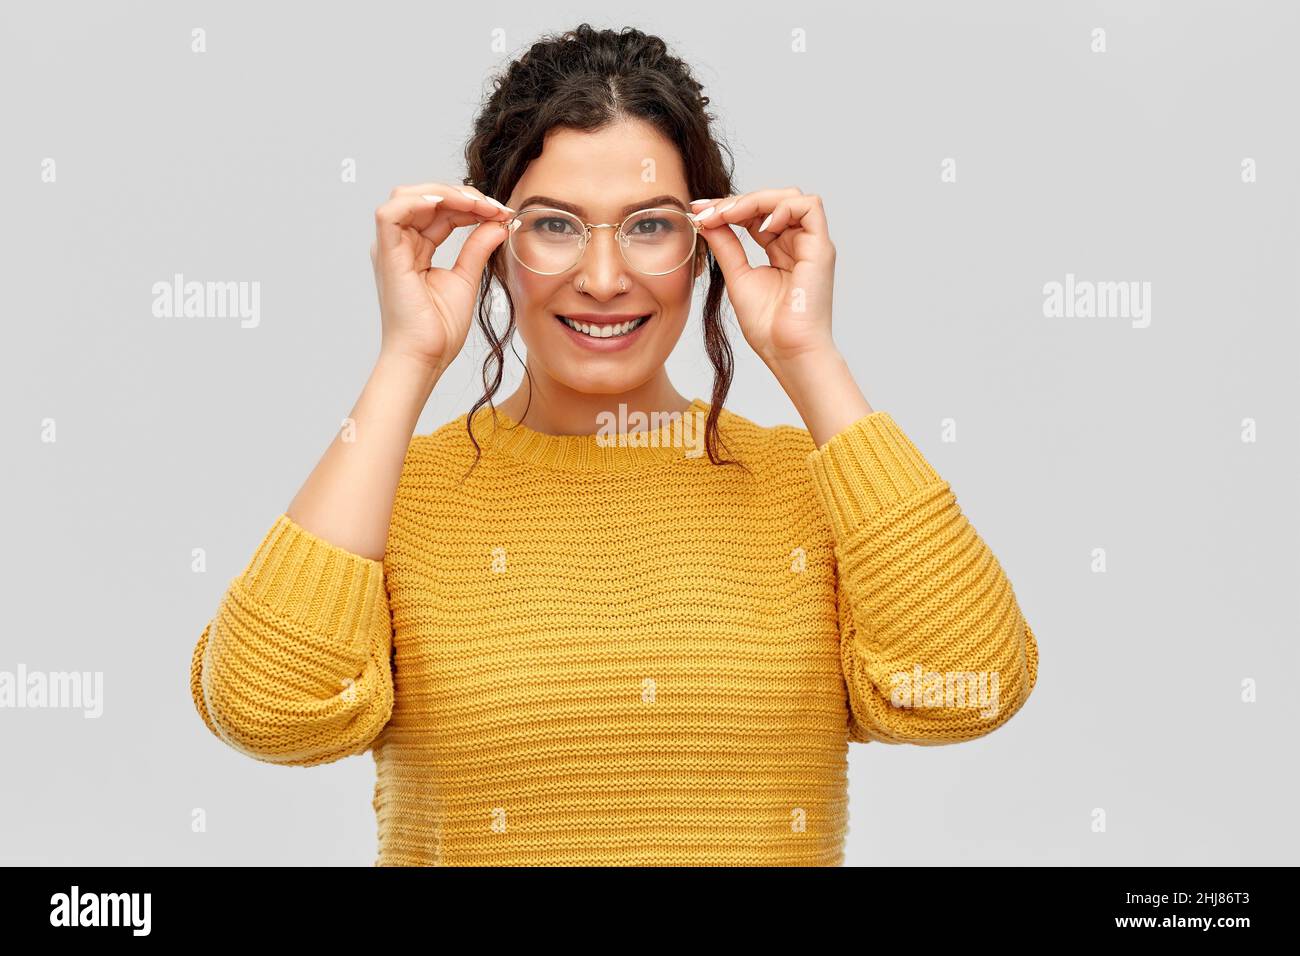 happy smiling young woman in glasses Stock Photo